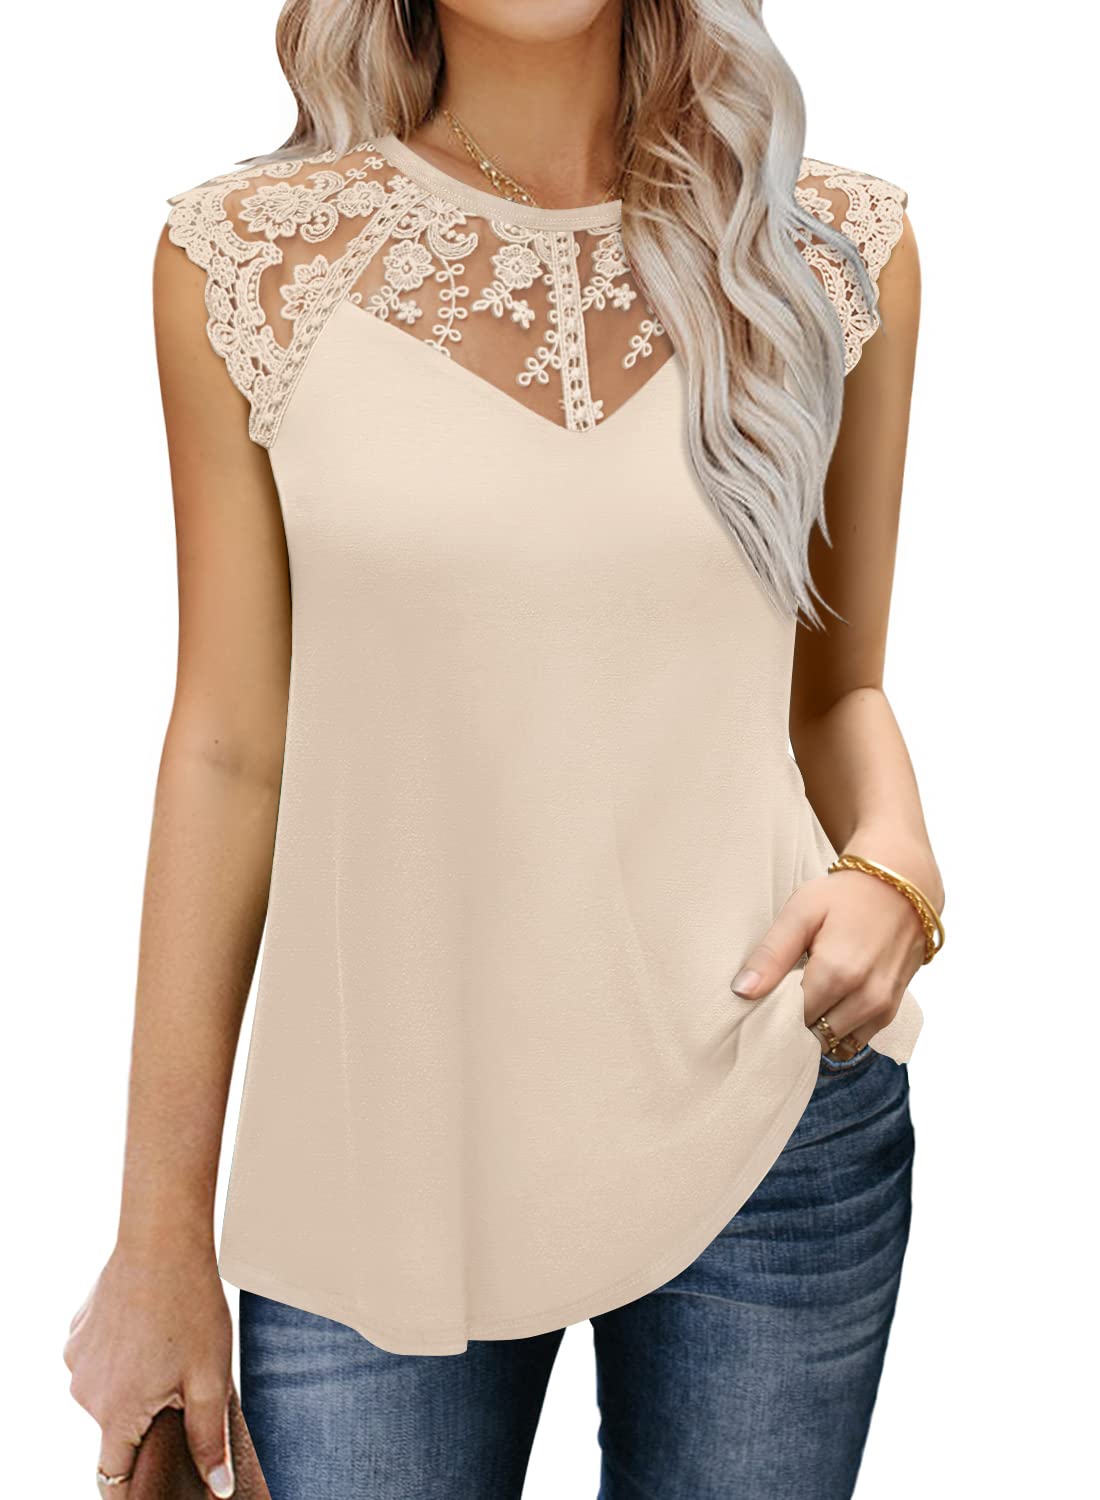 MIHOLL Women's Sleeveless Tops Lace Floral Casual Loose Blouses Tank Shirts